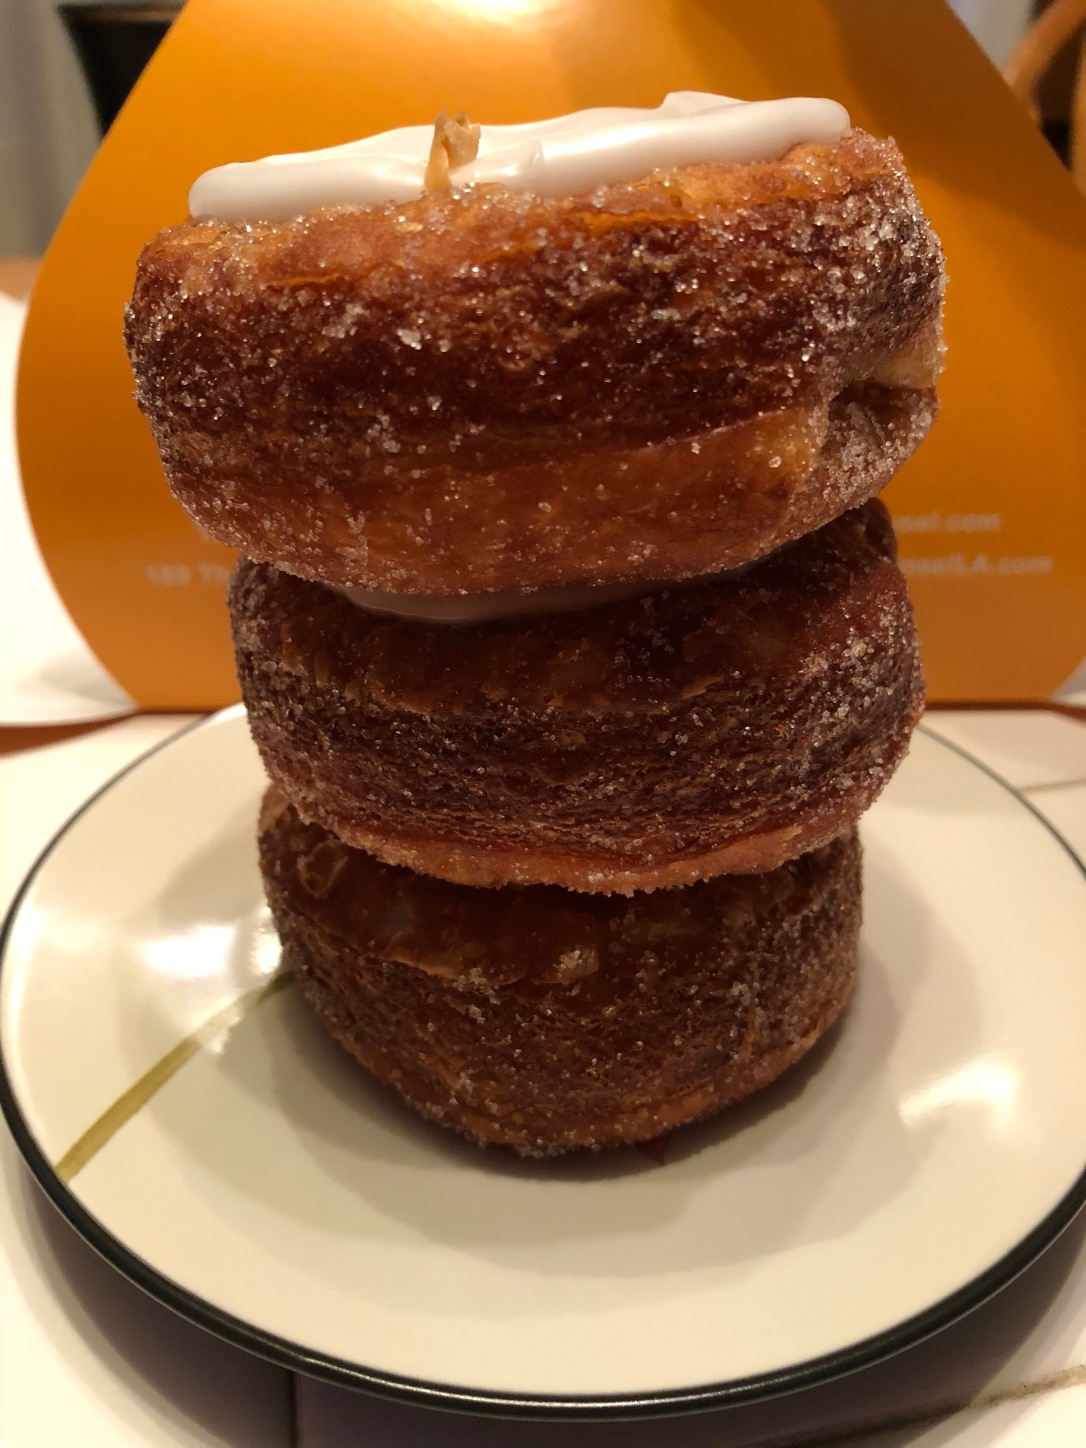 July 2018 Cronut by Dominique Ansel